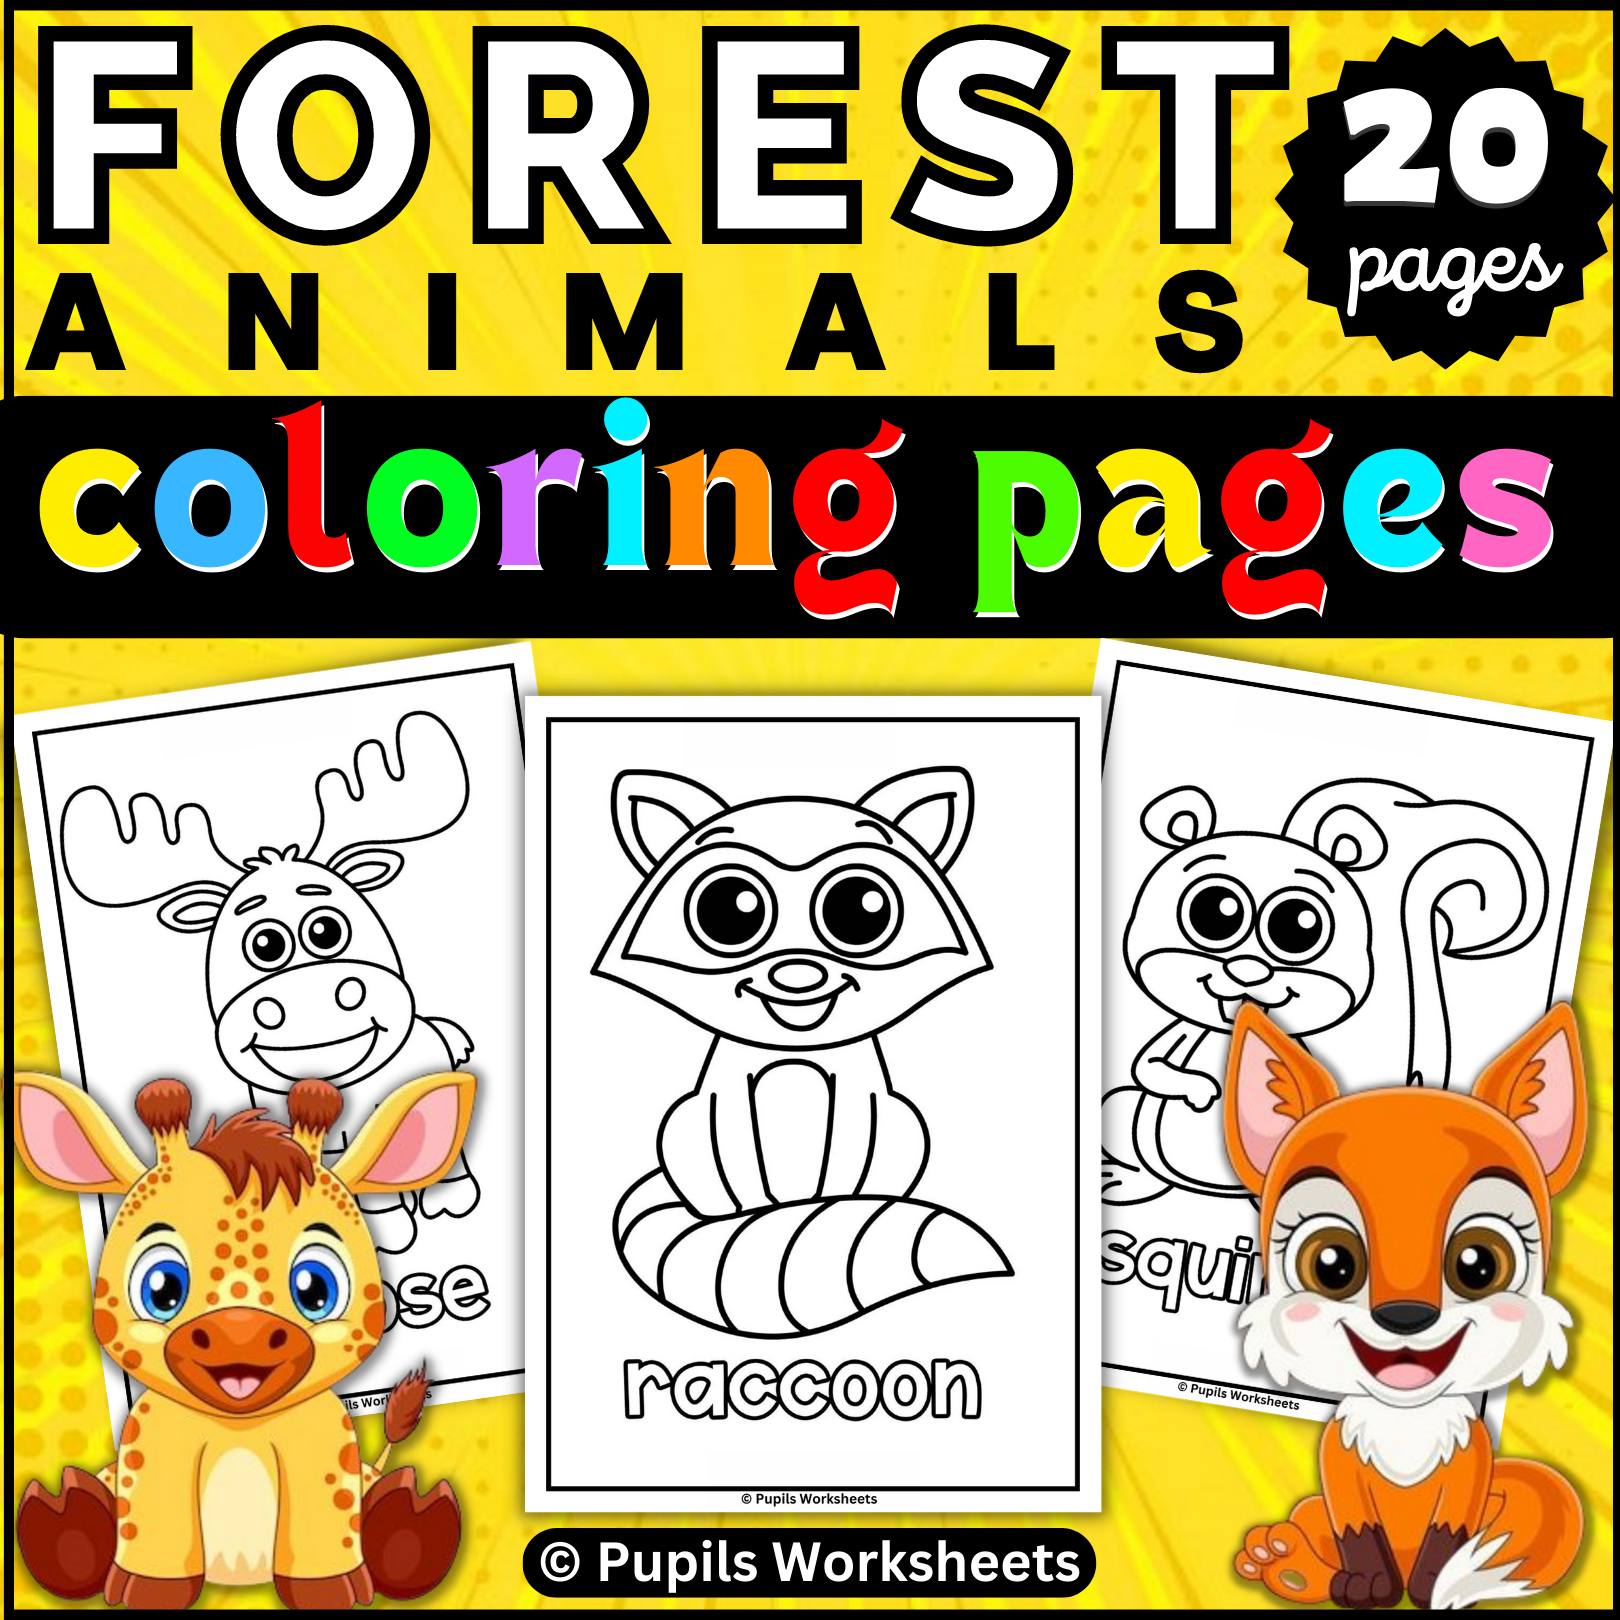 Woodland forest animals coloring pages